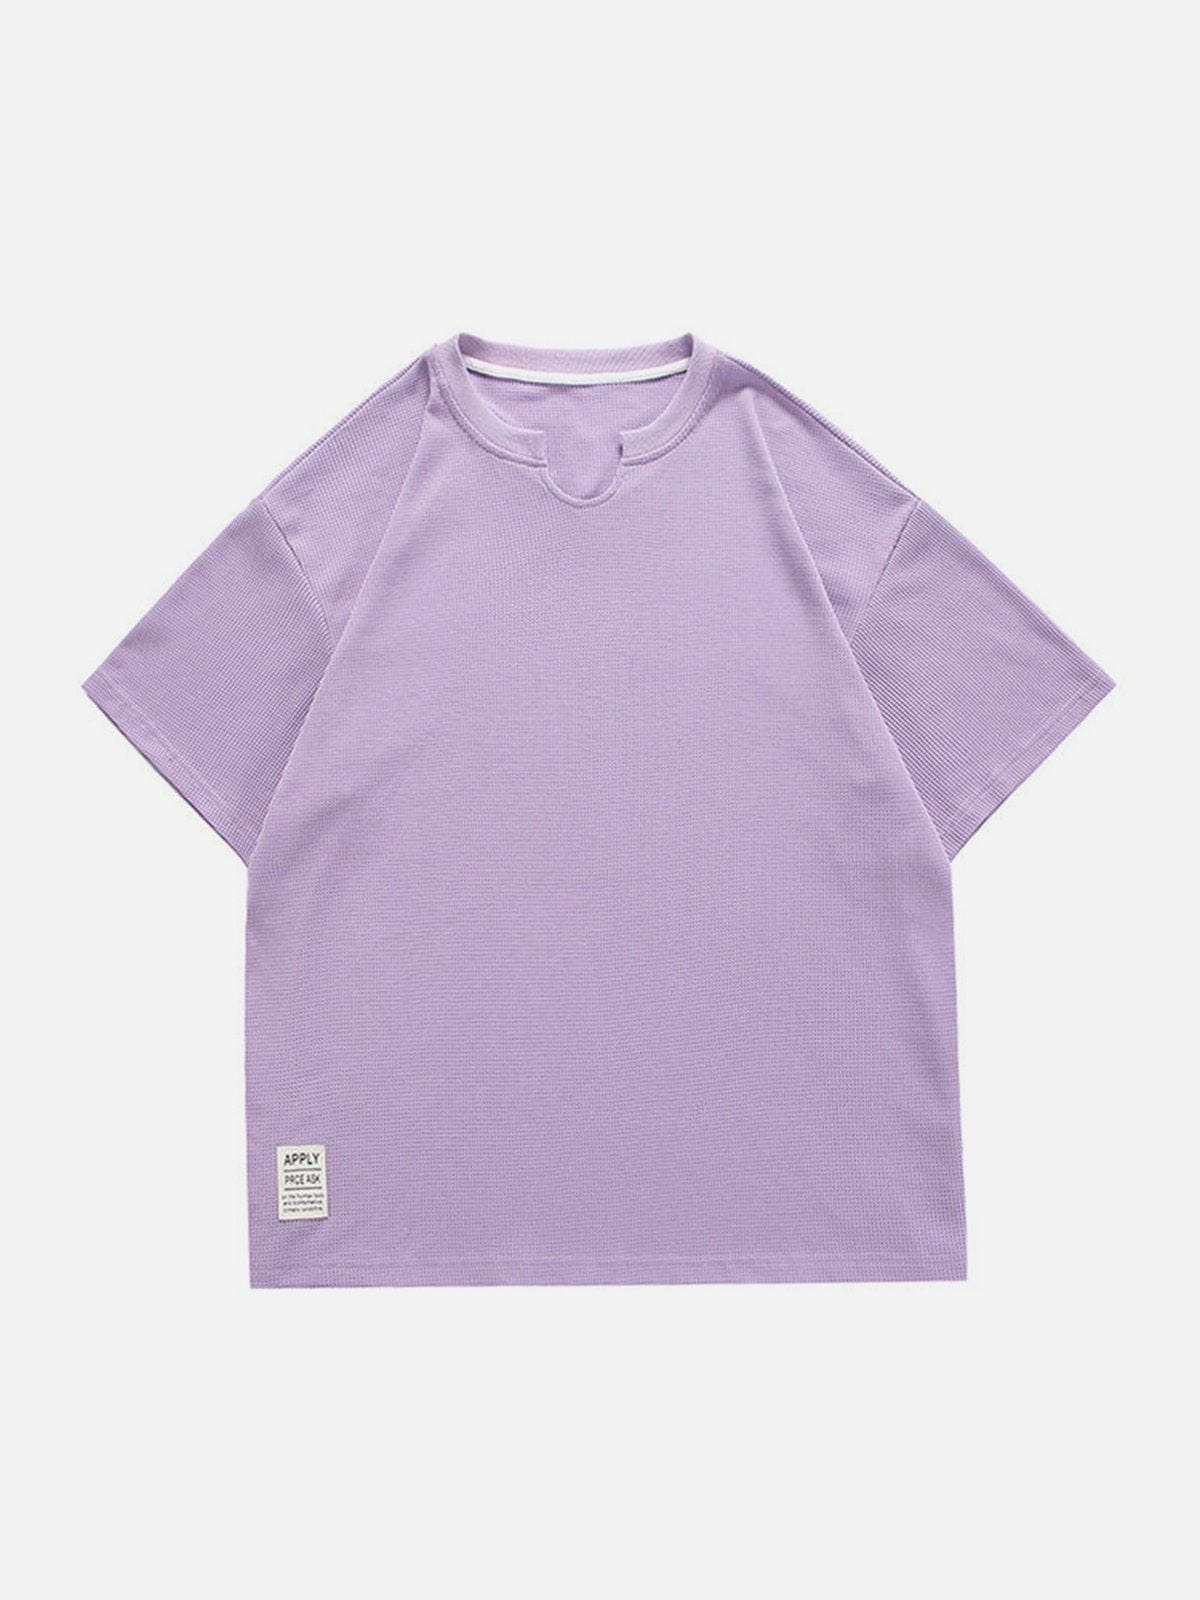 Sneakerland™ - Solid Color Essential Tee